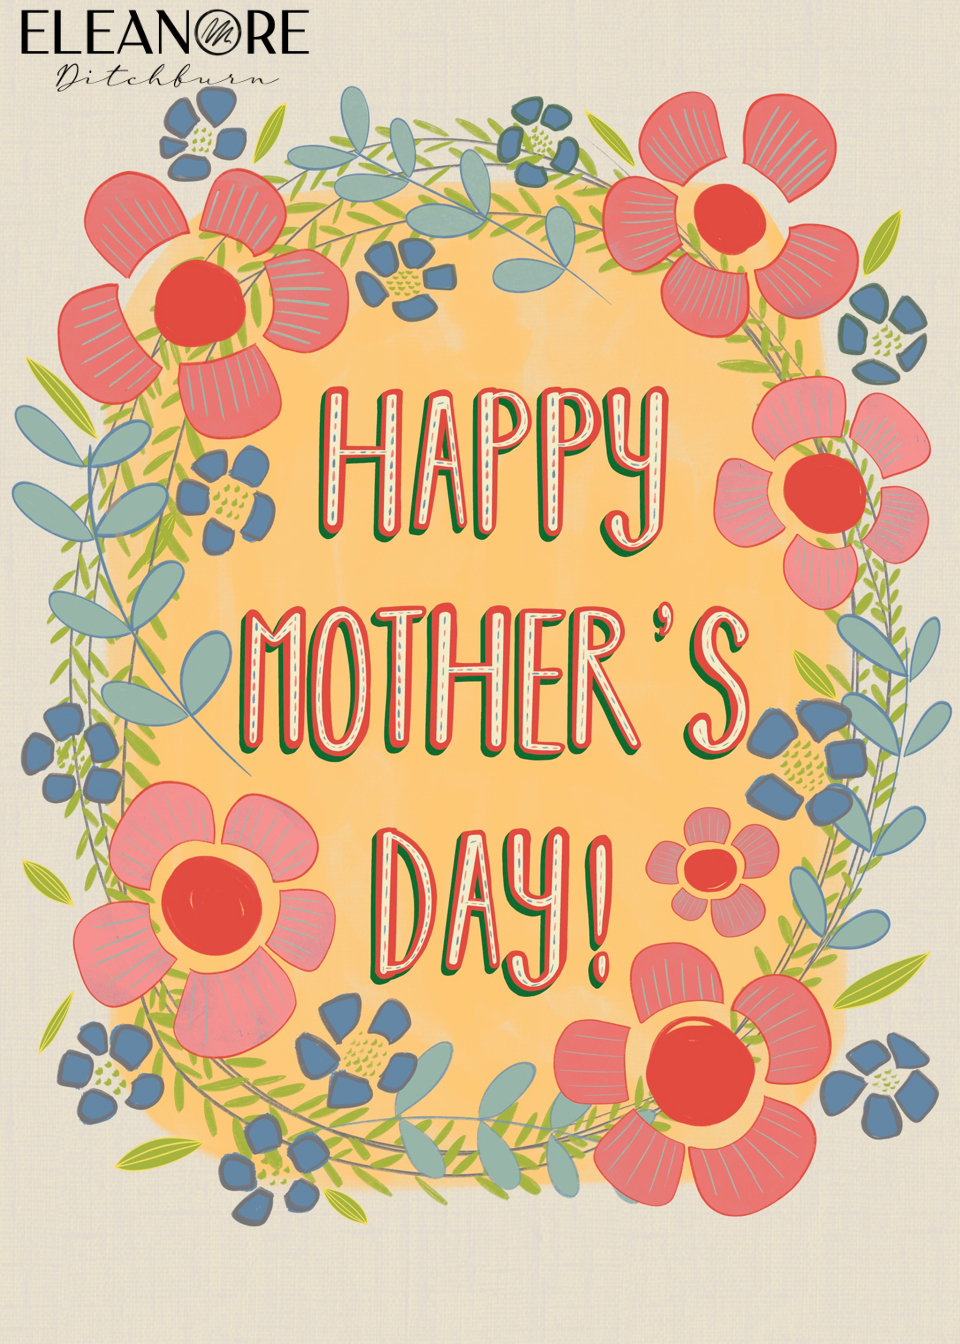 Fun, floral Mother’s Day card design by Eleanore Ditchburn.